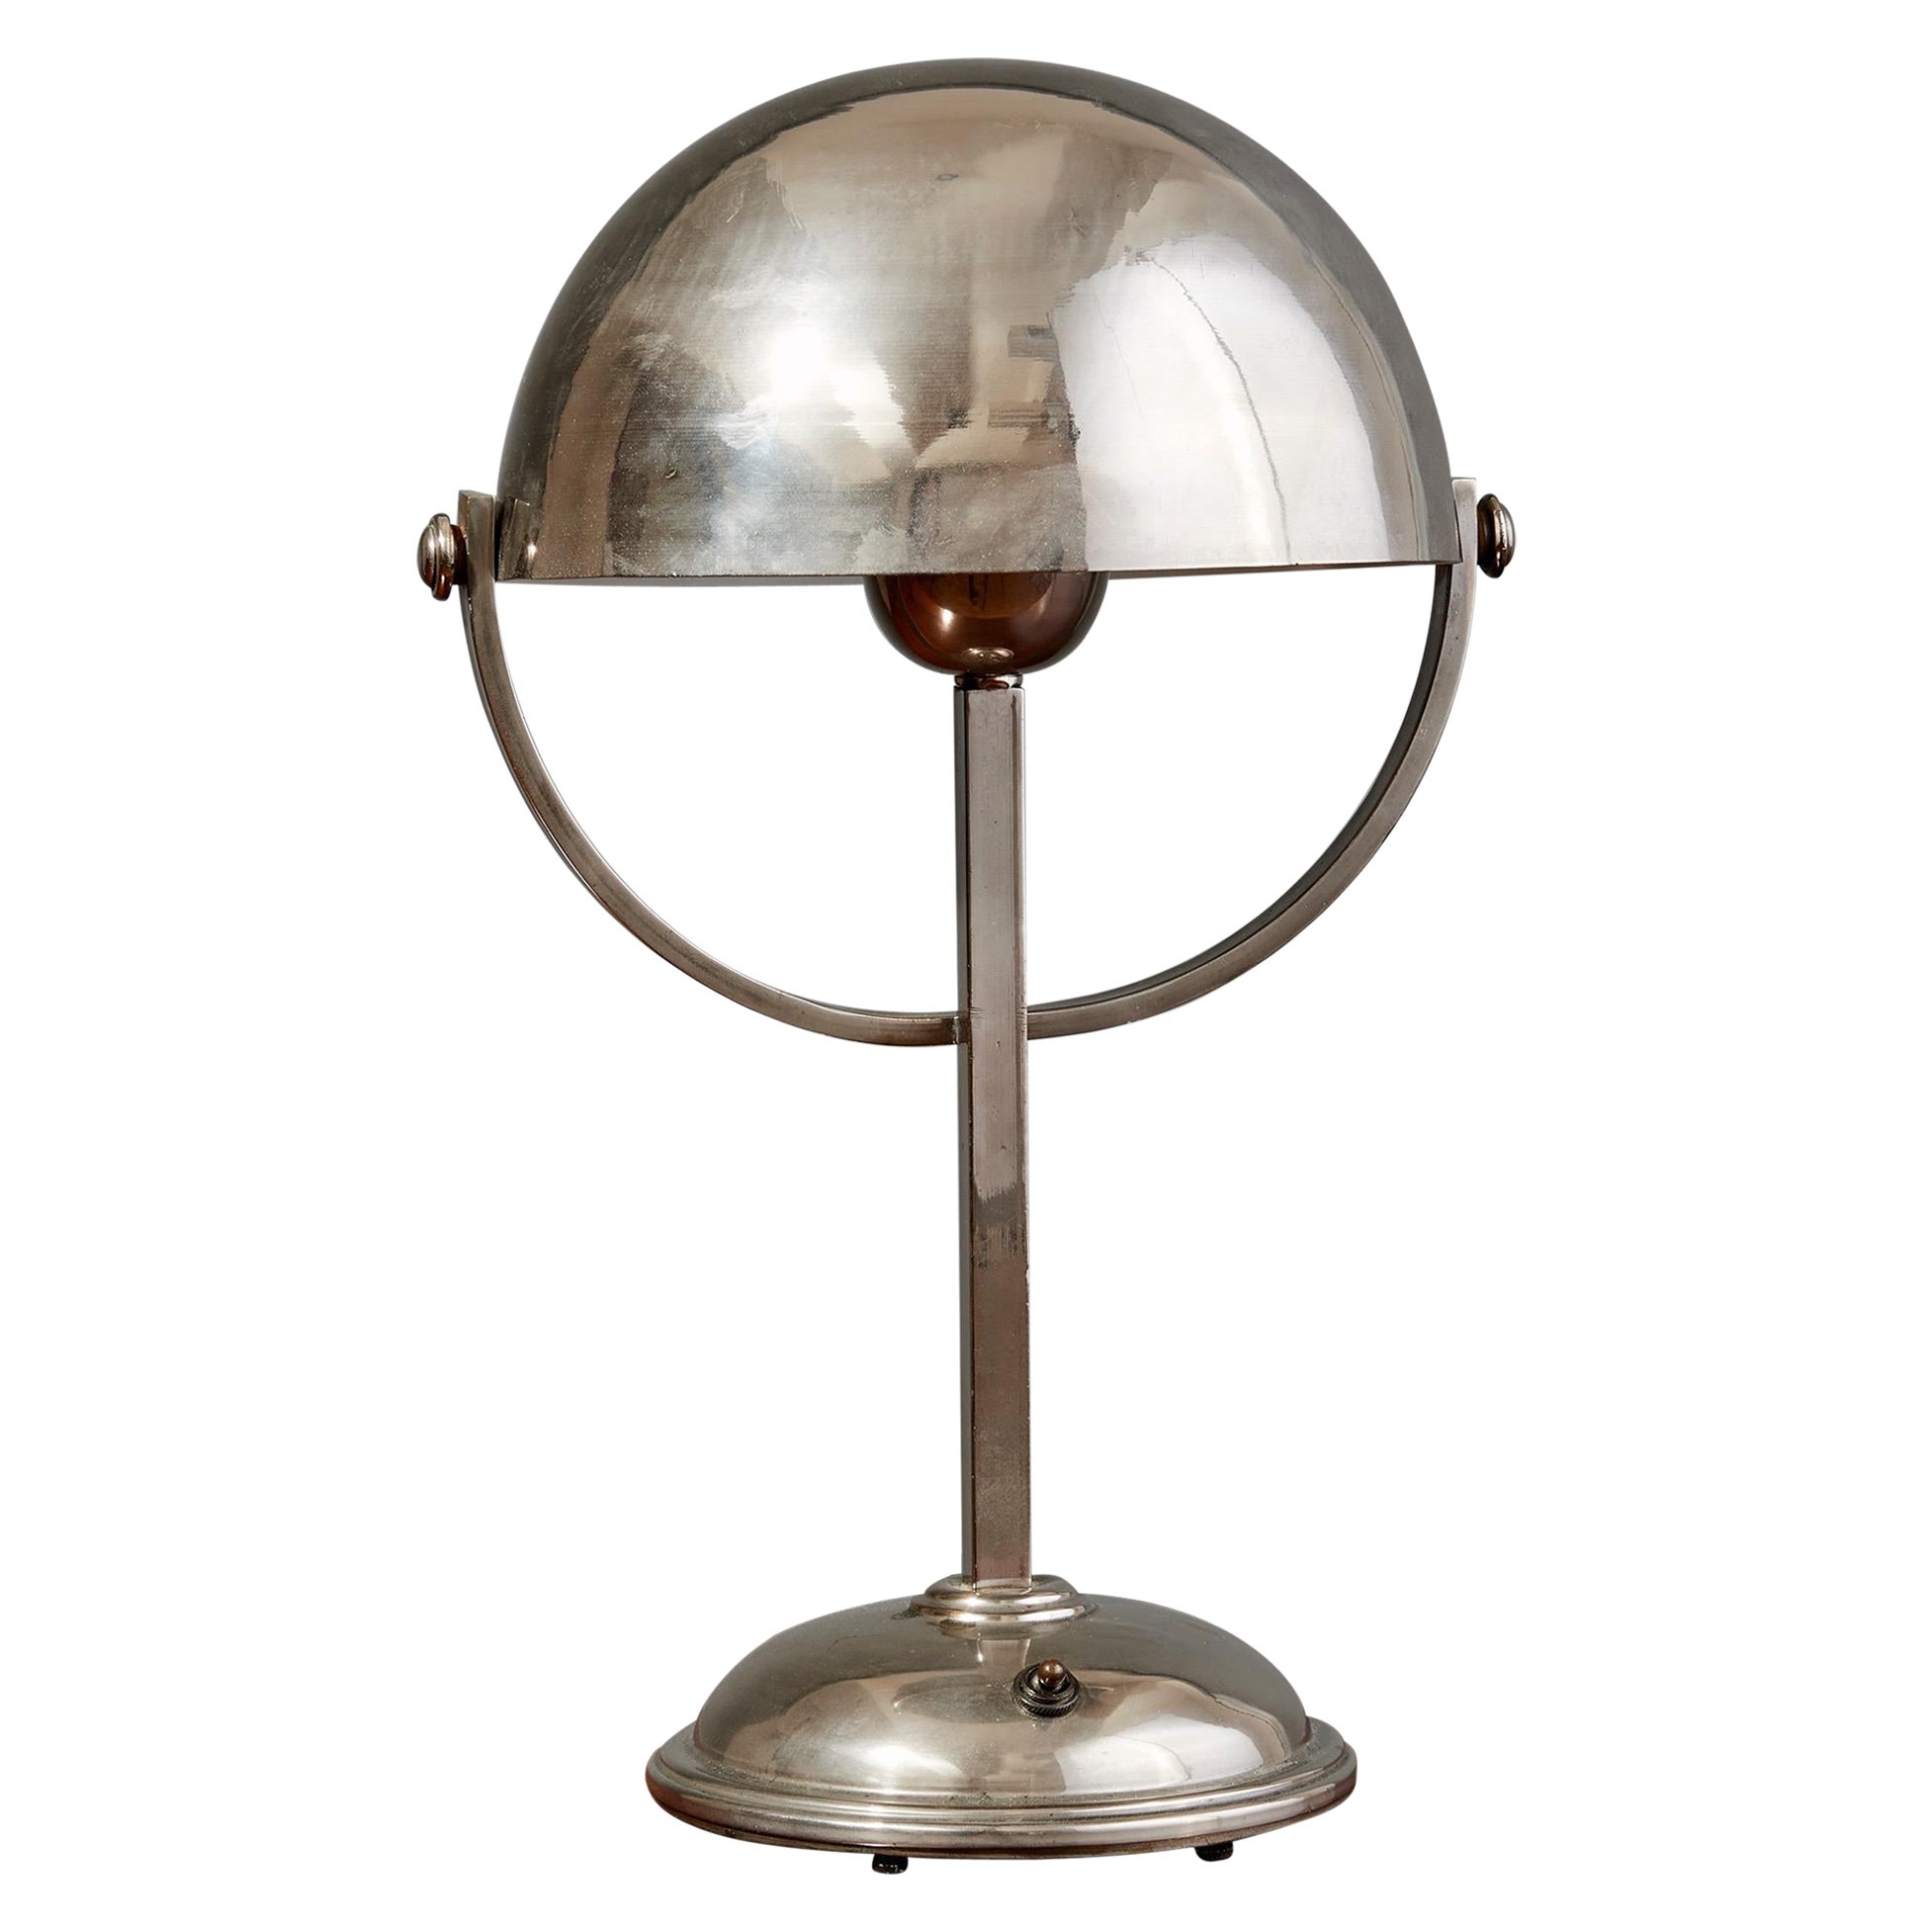 Felix Aublet Style Nickel-Plated Table Lamp with Rounded Shade, France 1930's For Sale